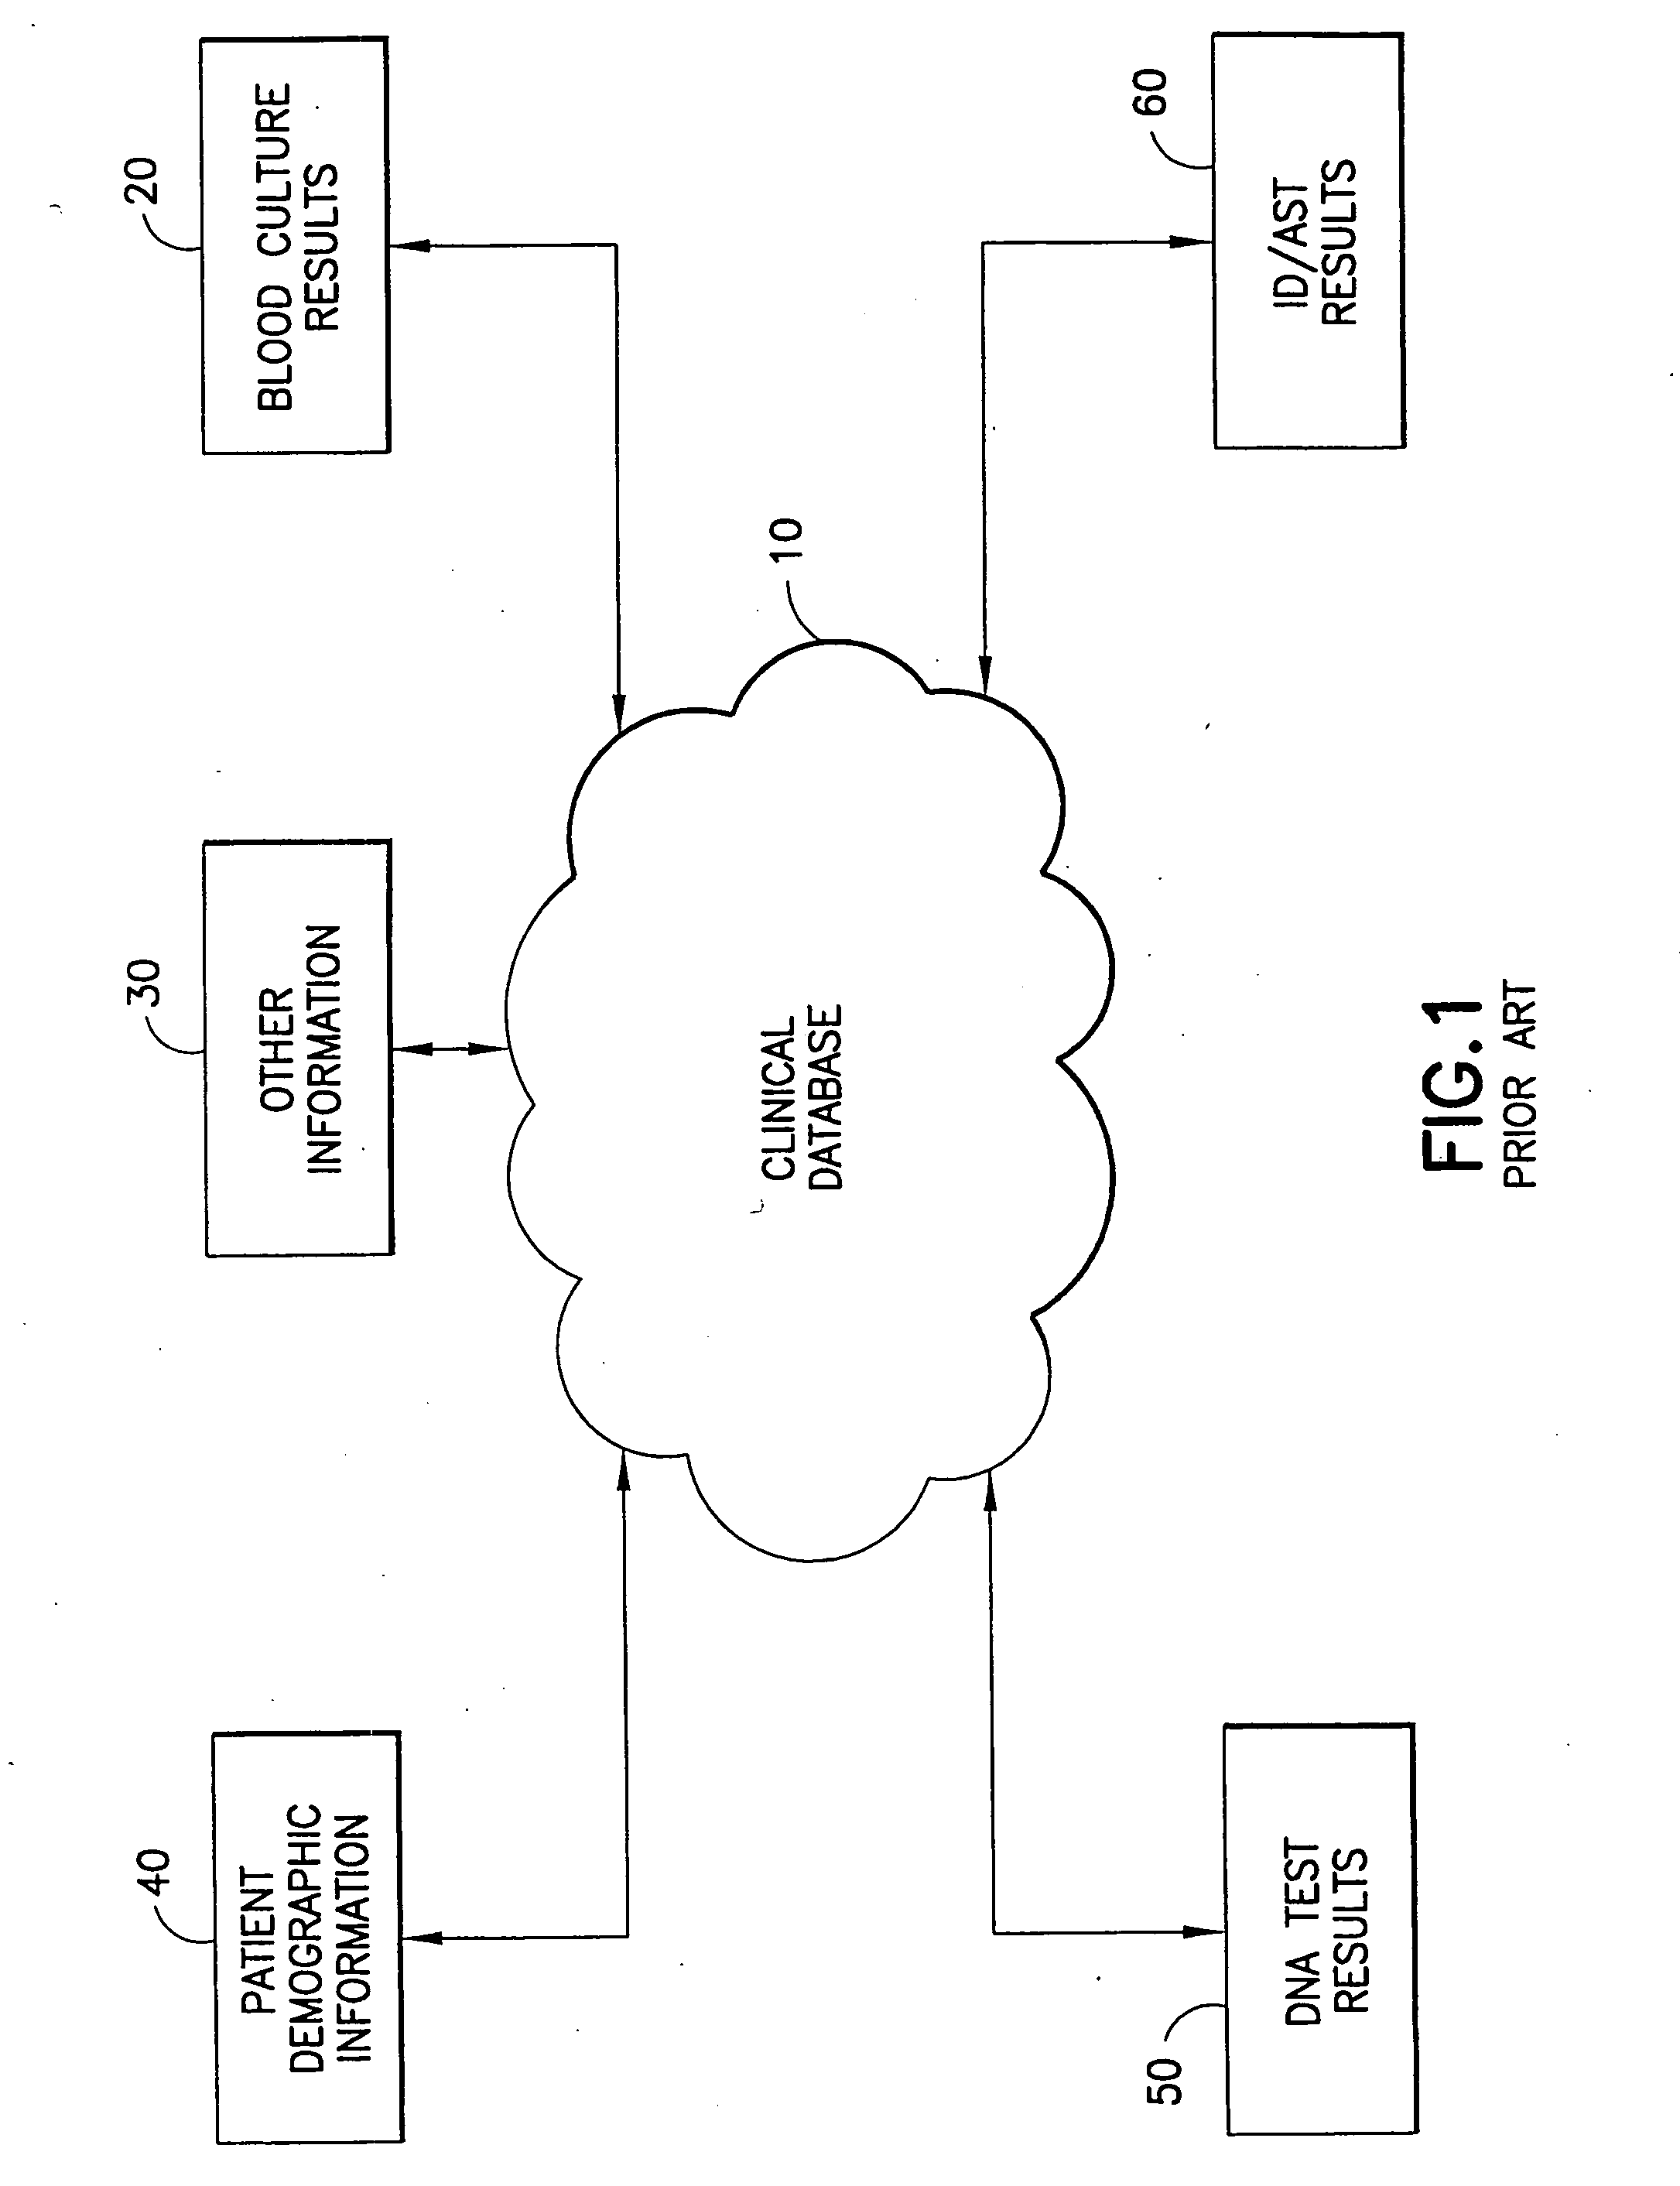 Graphical user interface for use with open expert system